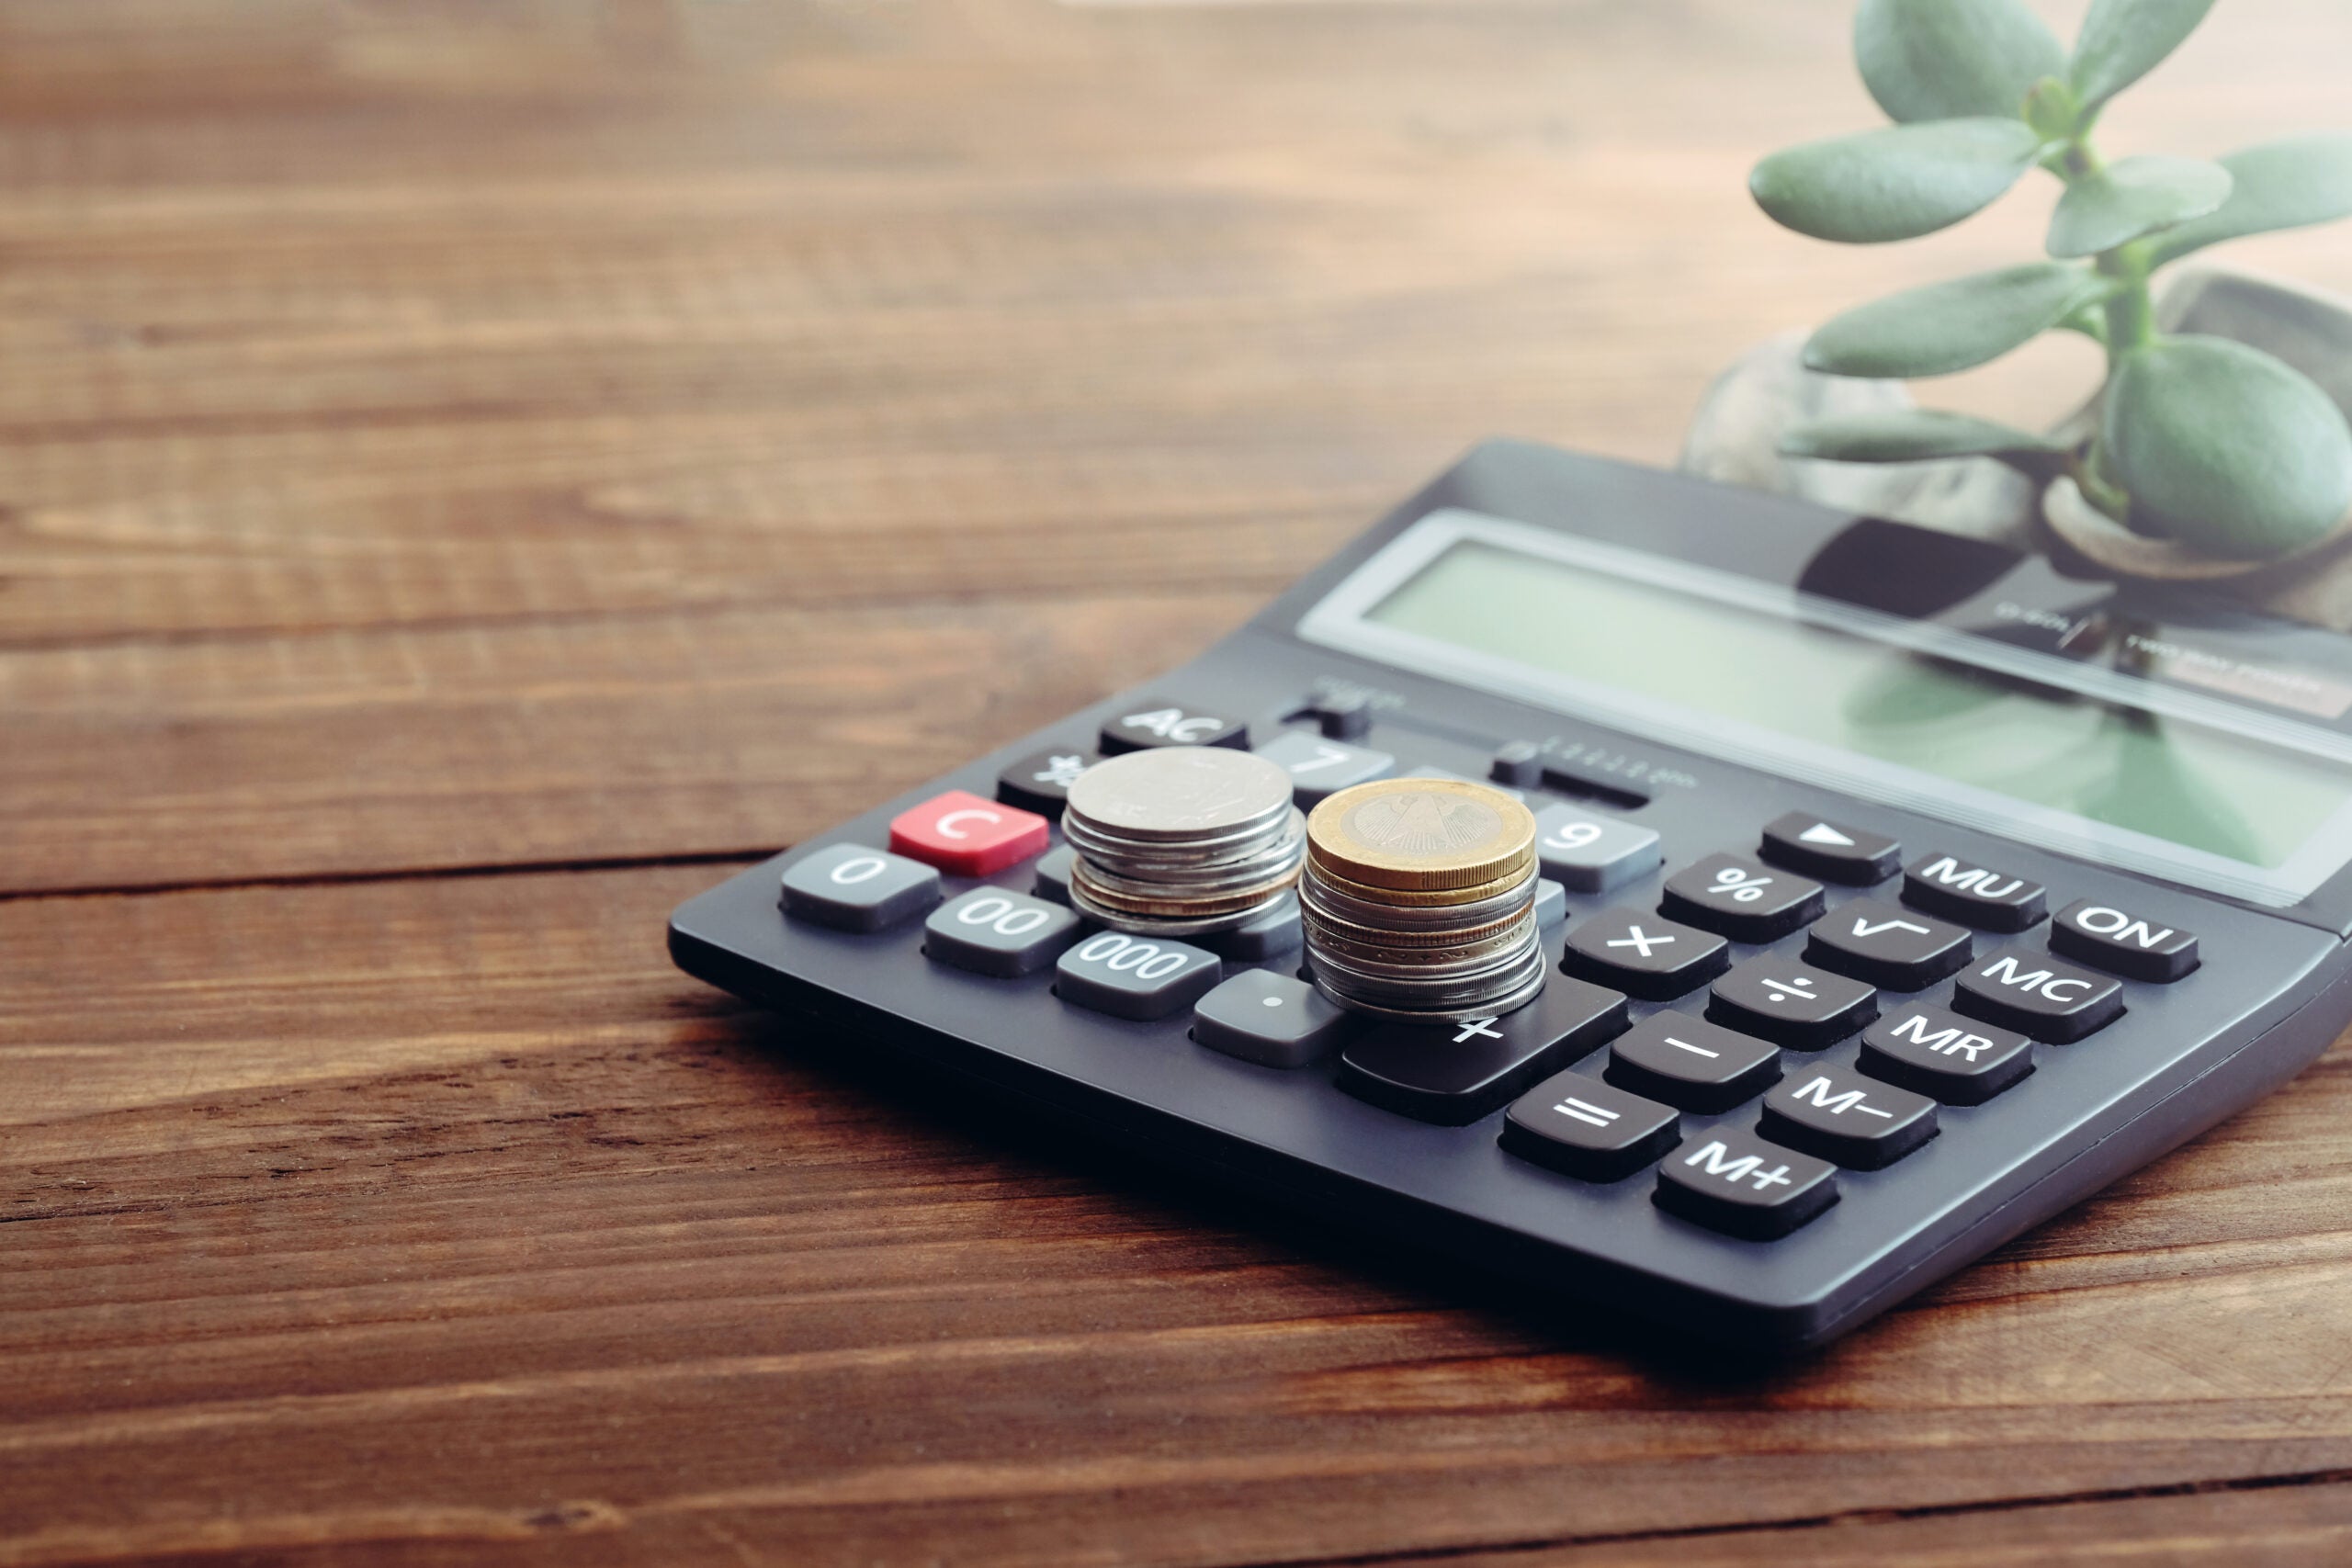 Calculator, coins of euro, money tree on wooden desk. Concept of growing money, money saving, financial investment, nature and finance, stock of cash